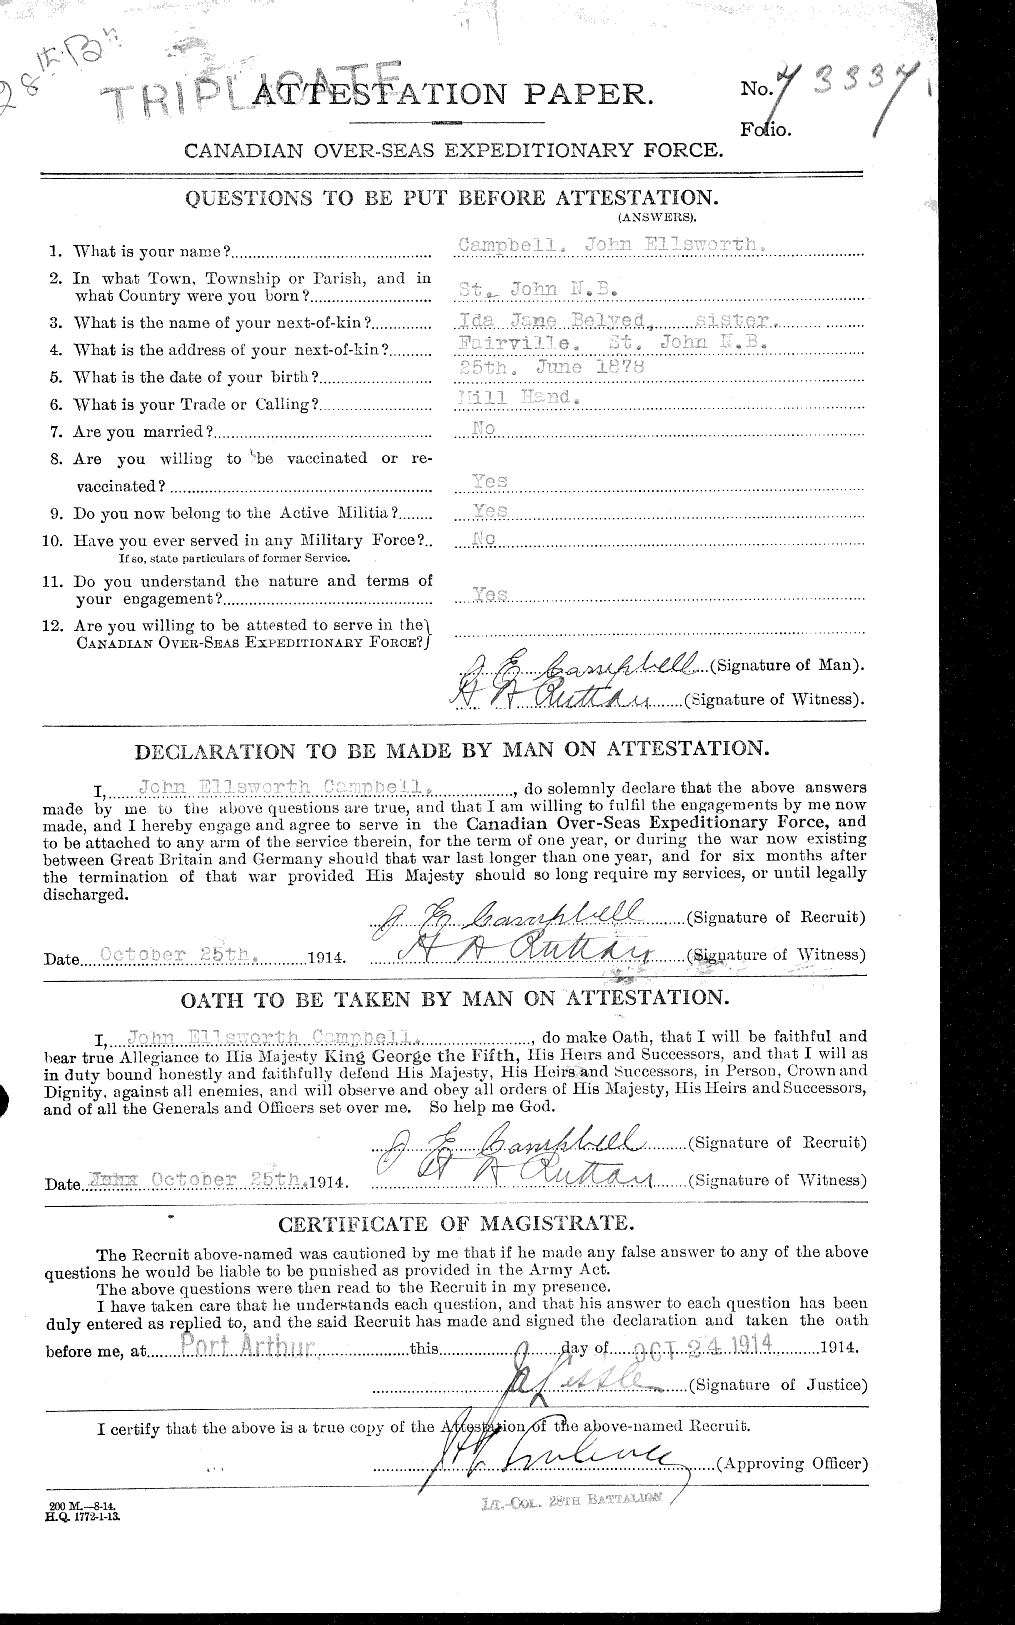 Personnel Records of the First World War - CEF 008516a